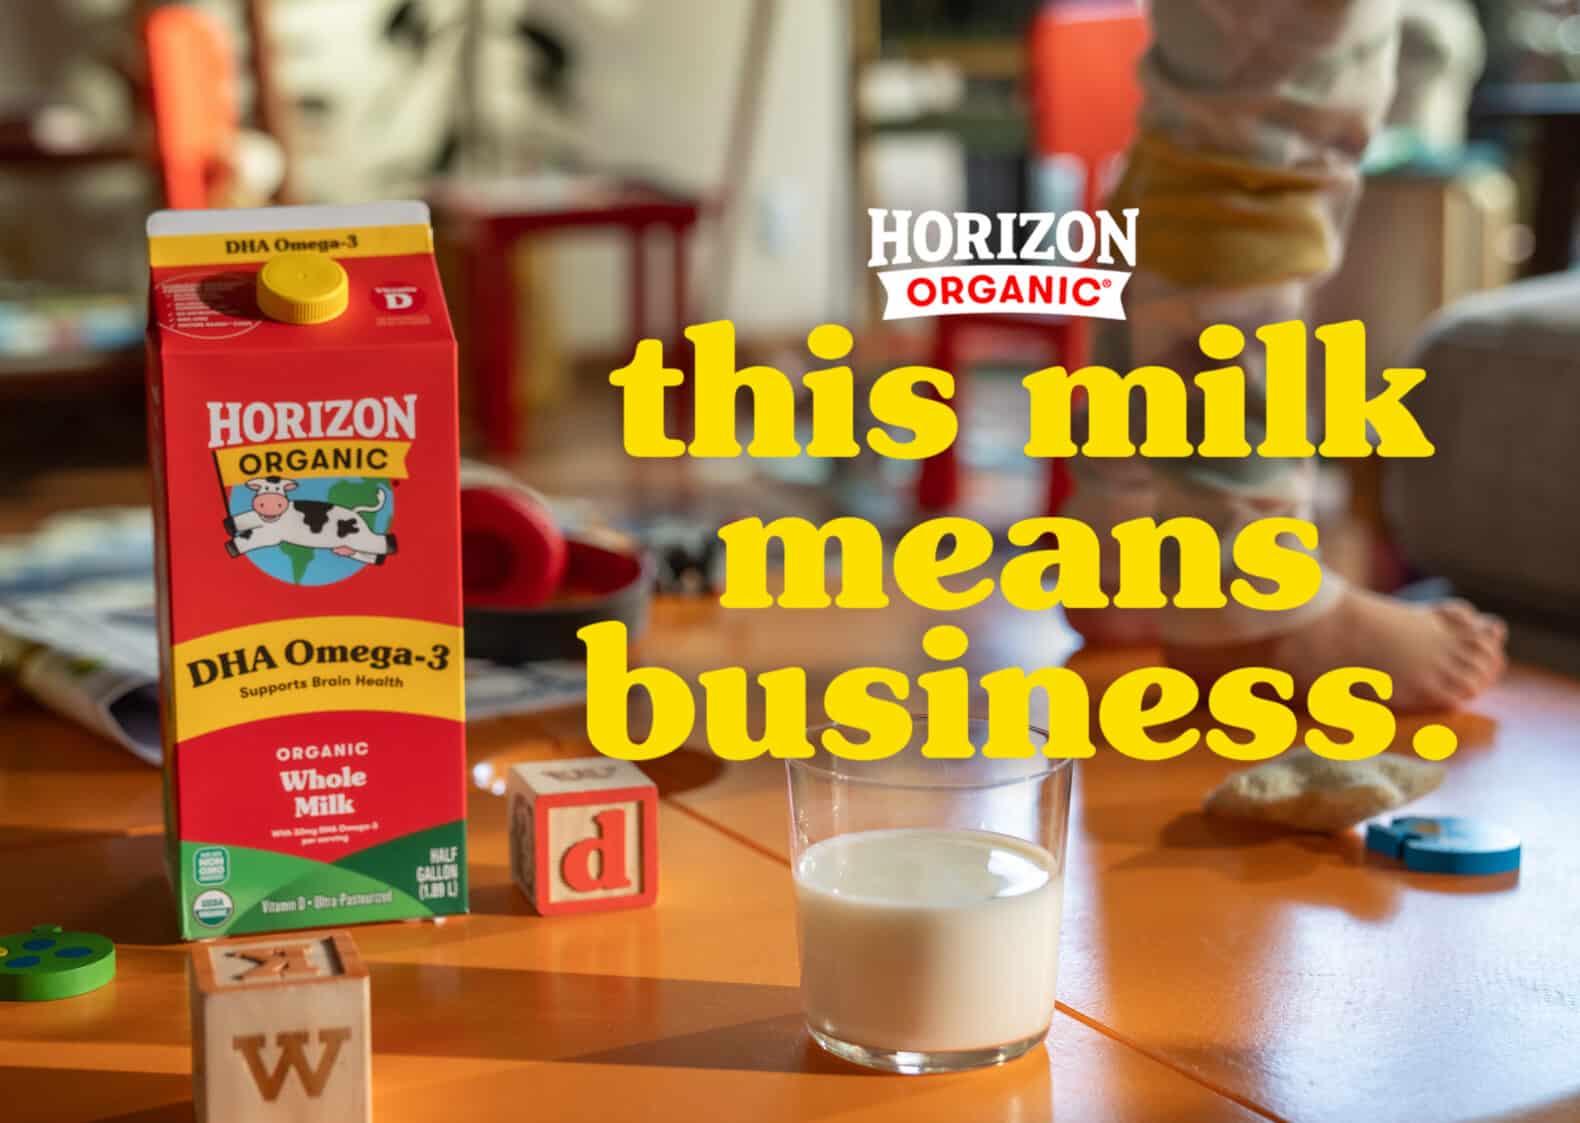 A half gallon of Horizon Organic whole milk sits on a living room coffee table next to a half-full glass of milk and a few children’s alphabet blocks. The campaign line, “this milk means business” is the headline, below the Horizon Organic logo. Behind the type we see a child’s feet; she’s standing on the table.